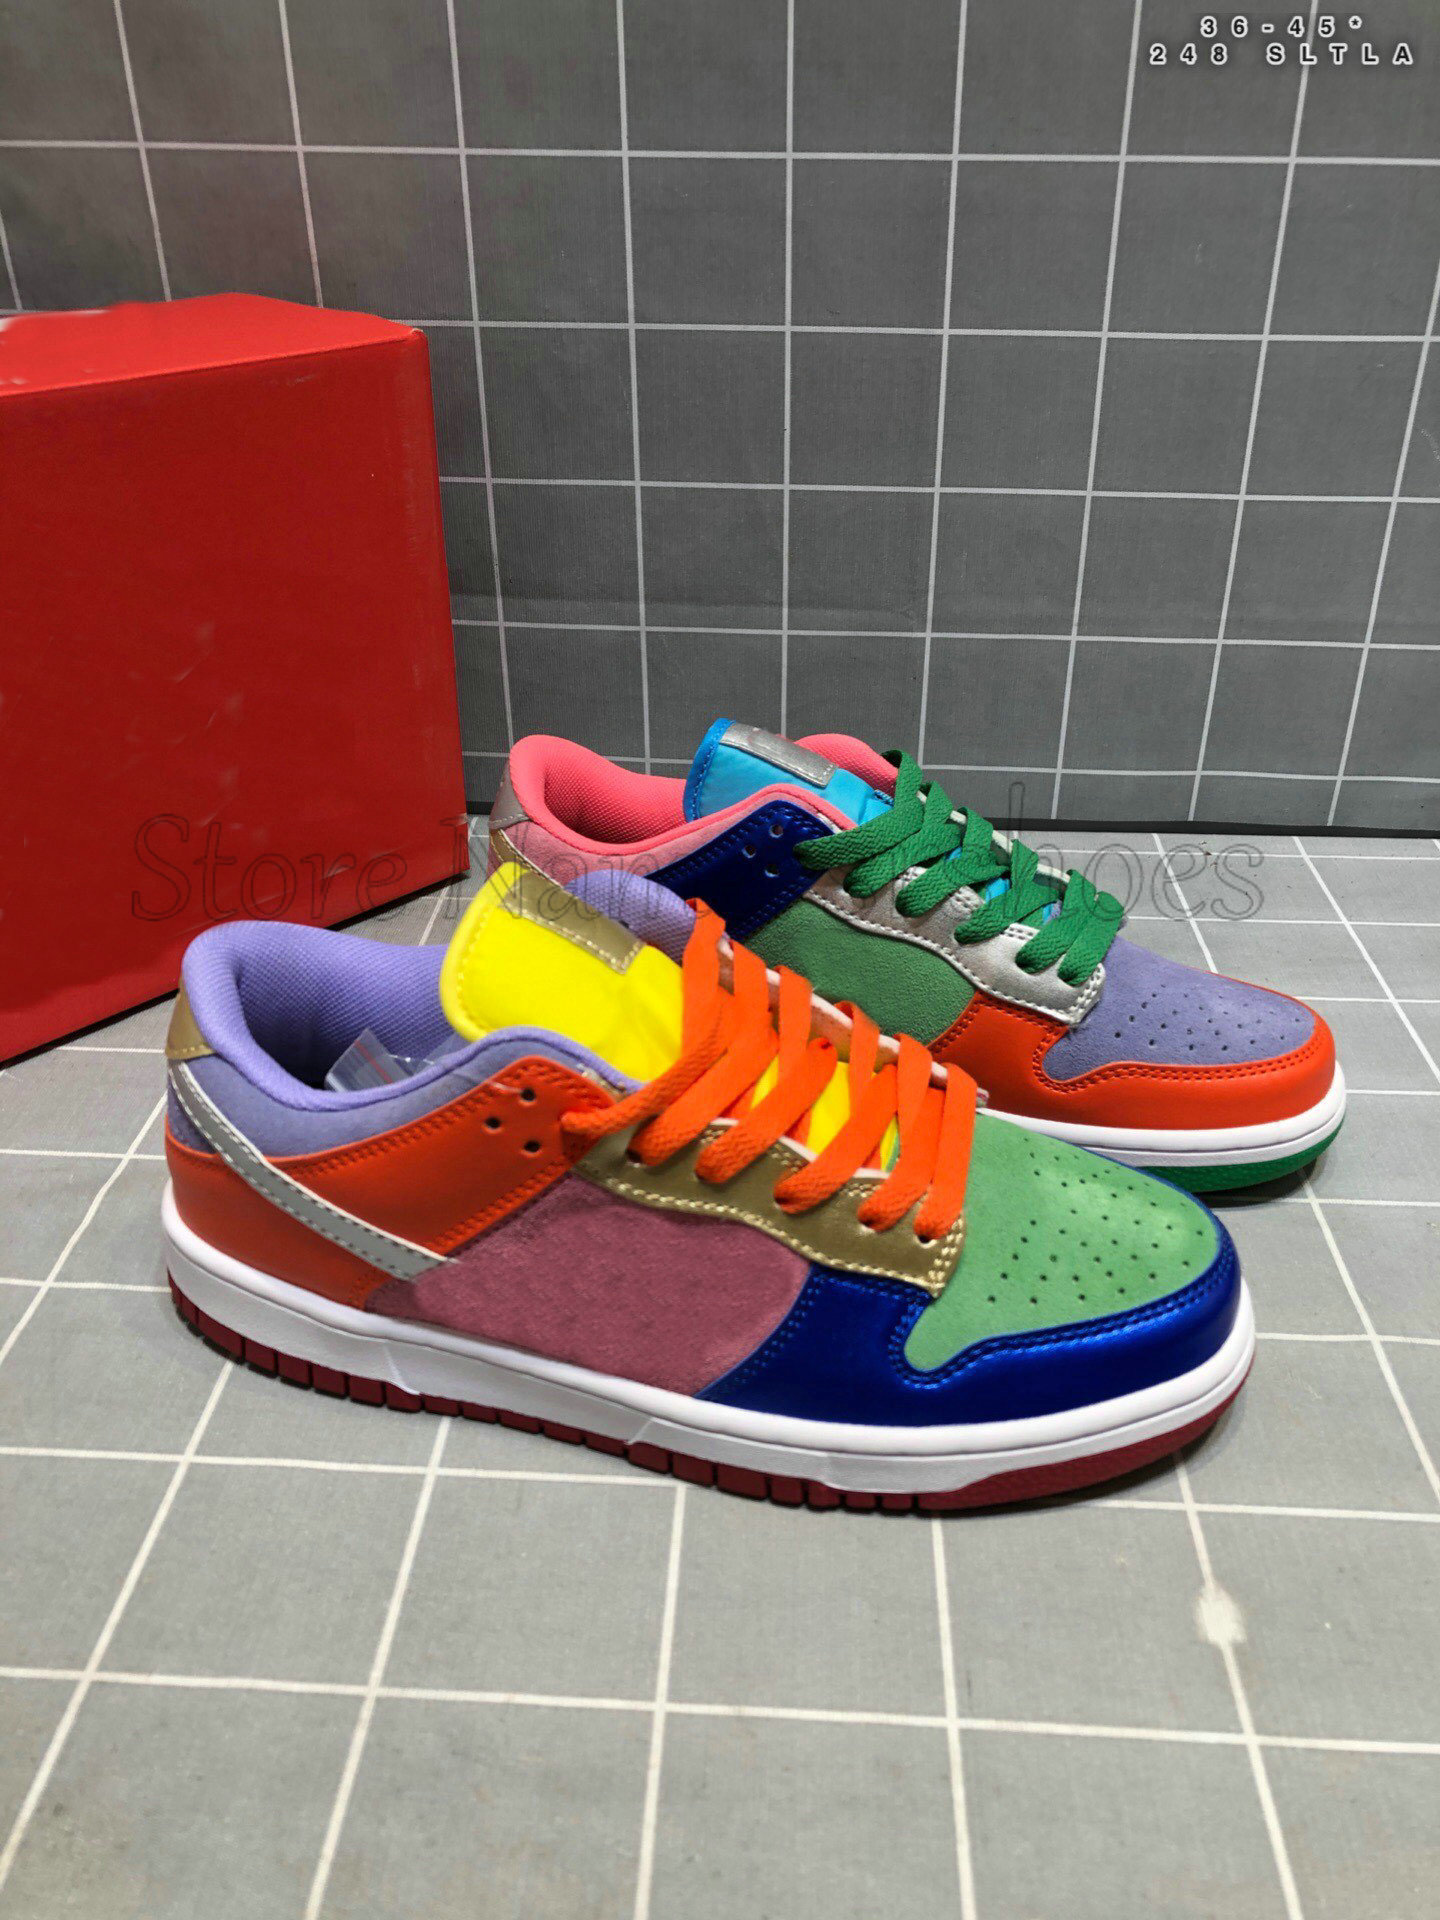 

Dunks Low WMNS Sunset Pulse Men Womens Skateboard SB Designer Shoes Silver Purple Trainer Sport Zapatos Sneakers, Others